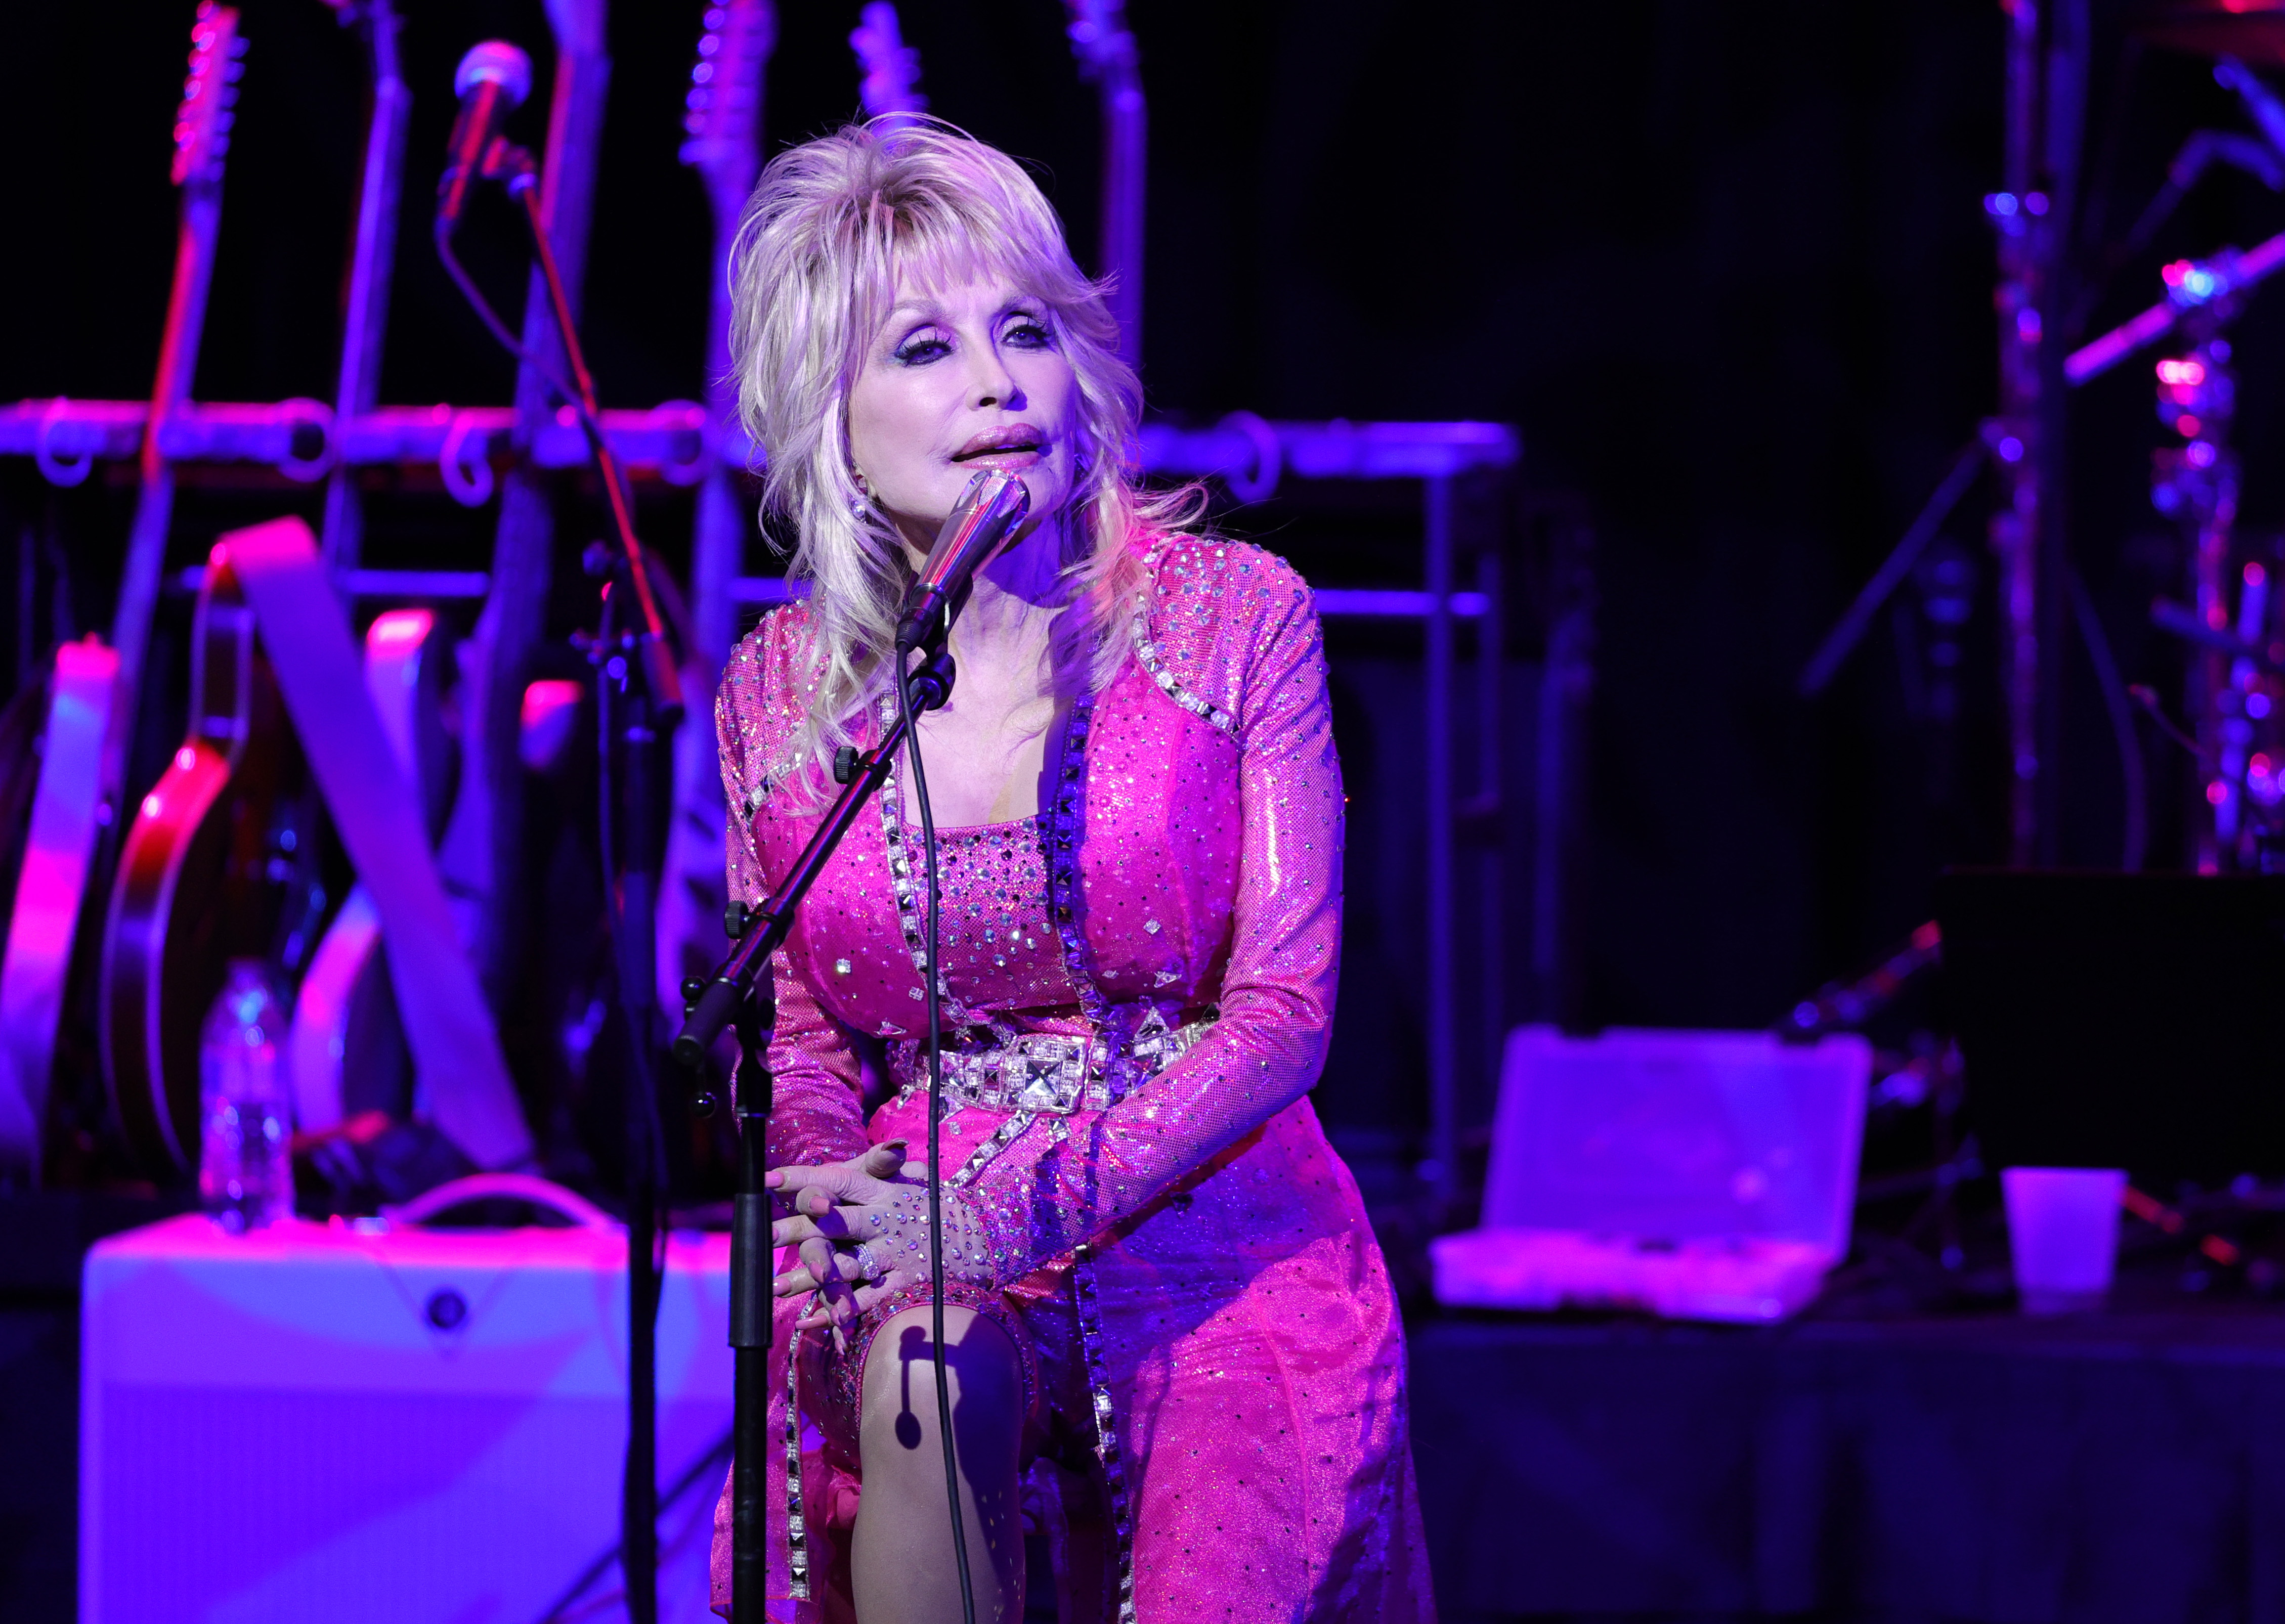 Dolly Parton sits in front of a microphone while dressed in a fuchsia outfit.